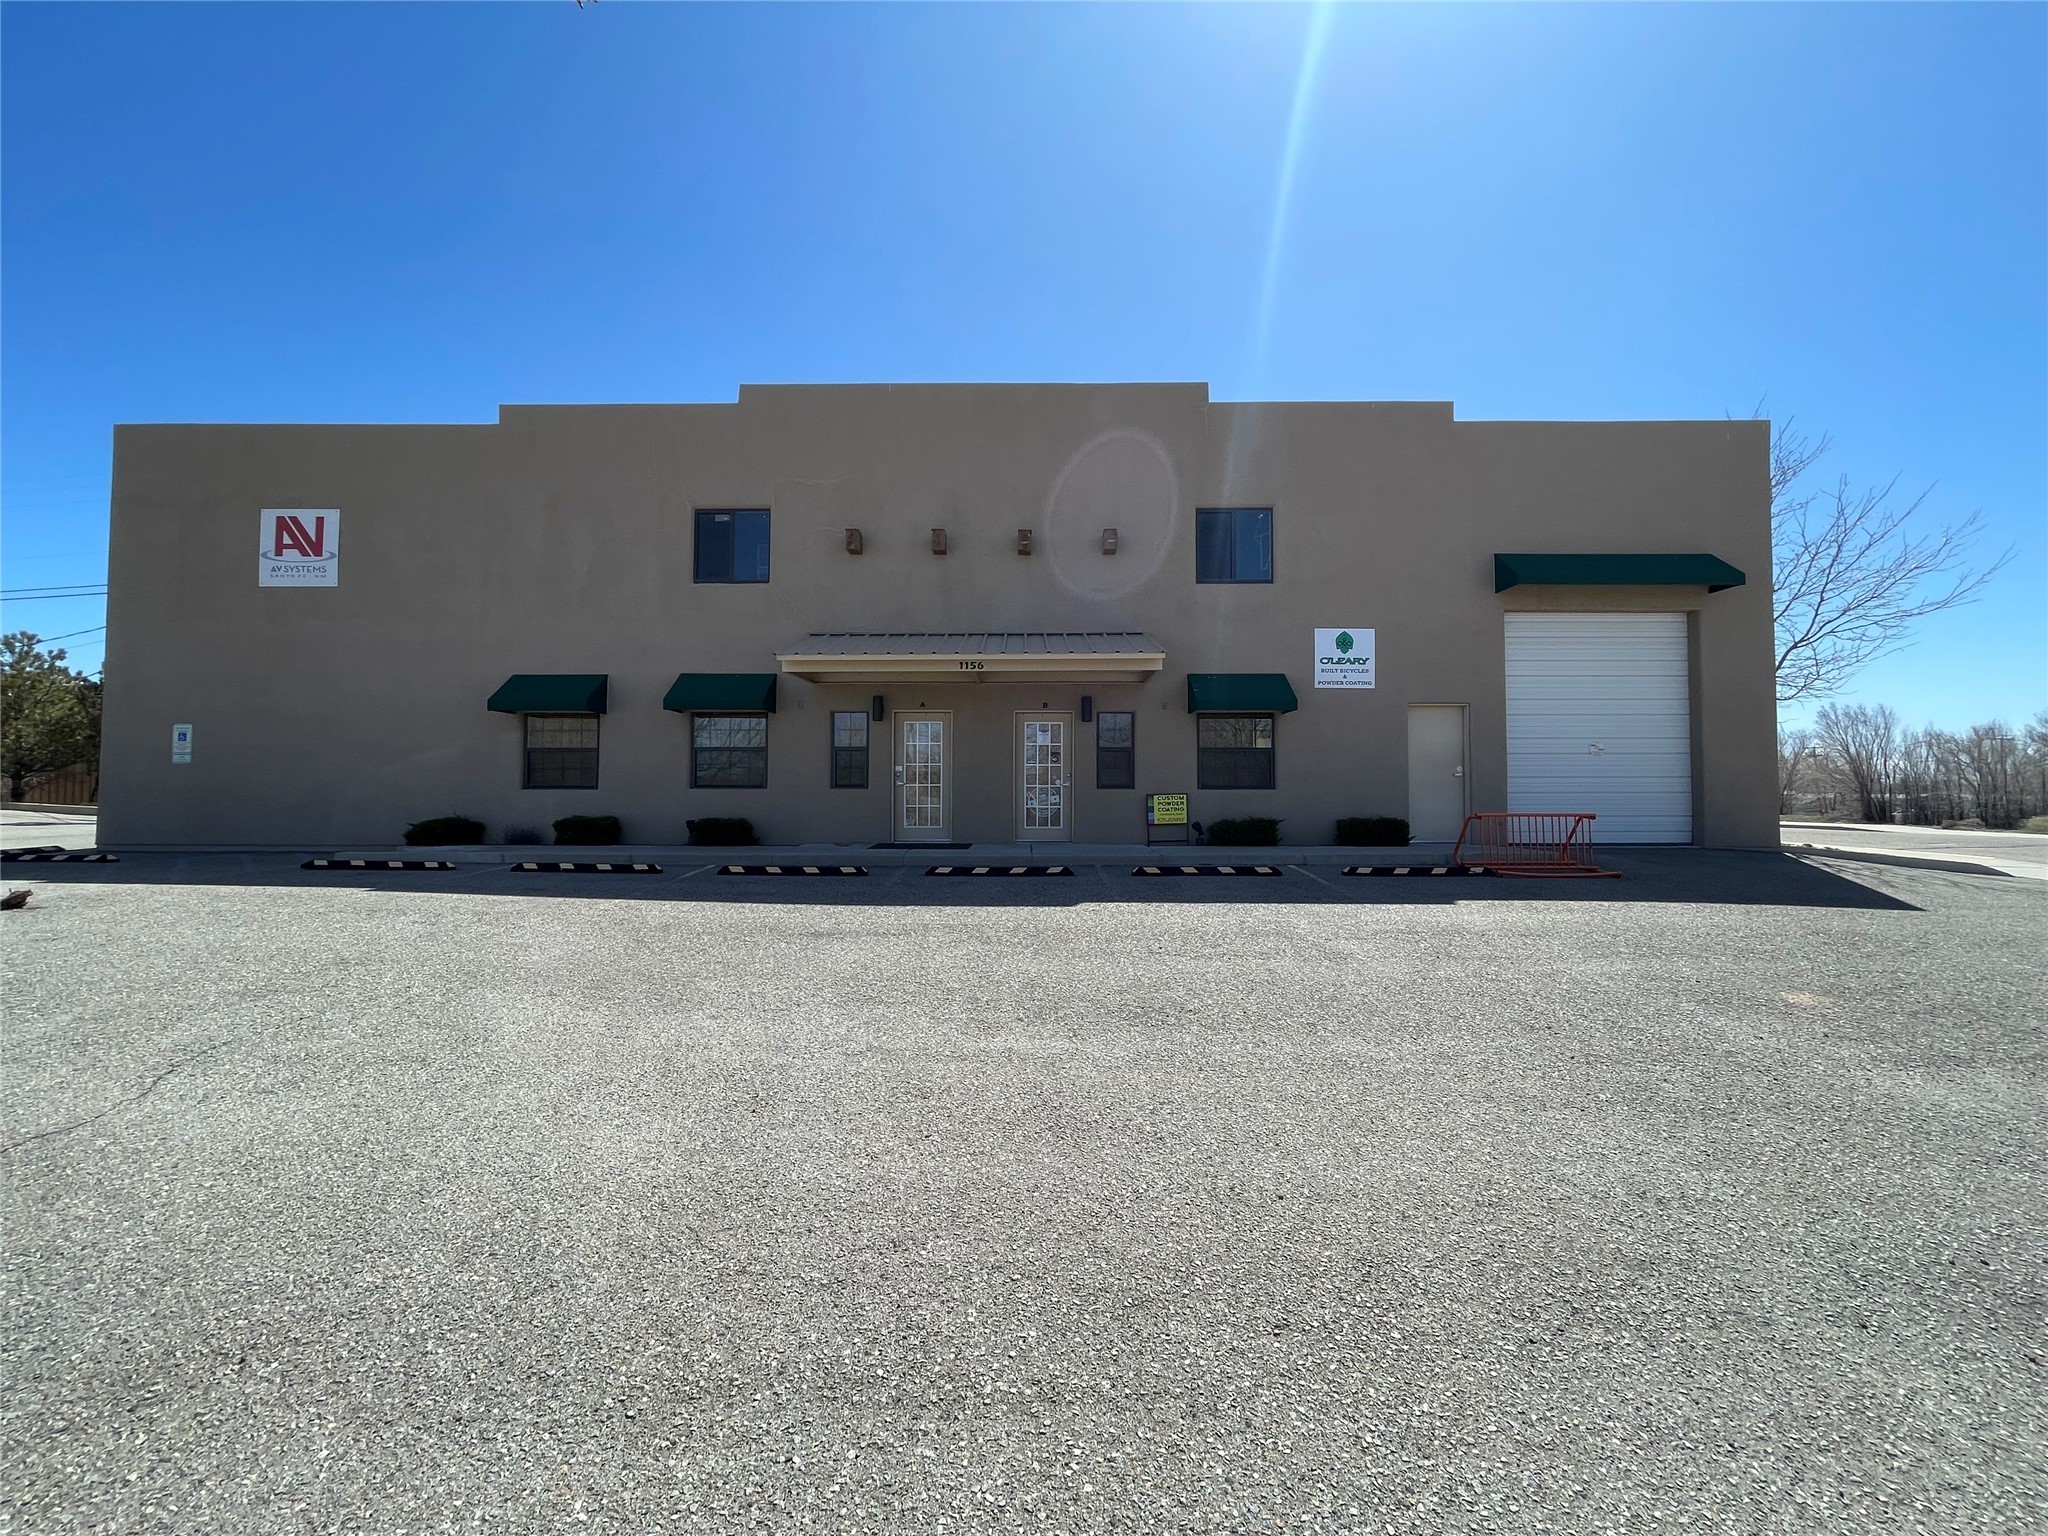 1156 Parkway Drive Suite B, Santa Fe, New Mexico 87507, ,Commercial Lease,For Rent,1156 Parkway Drive Suite B,202336297